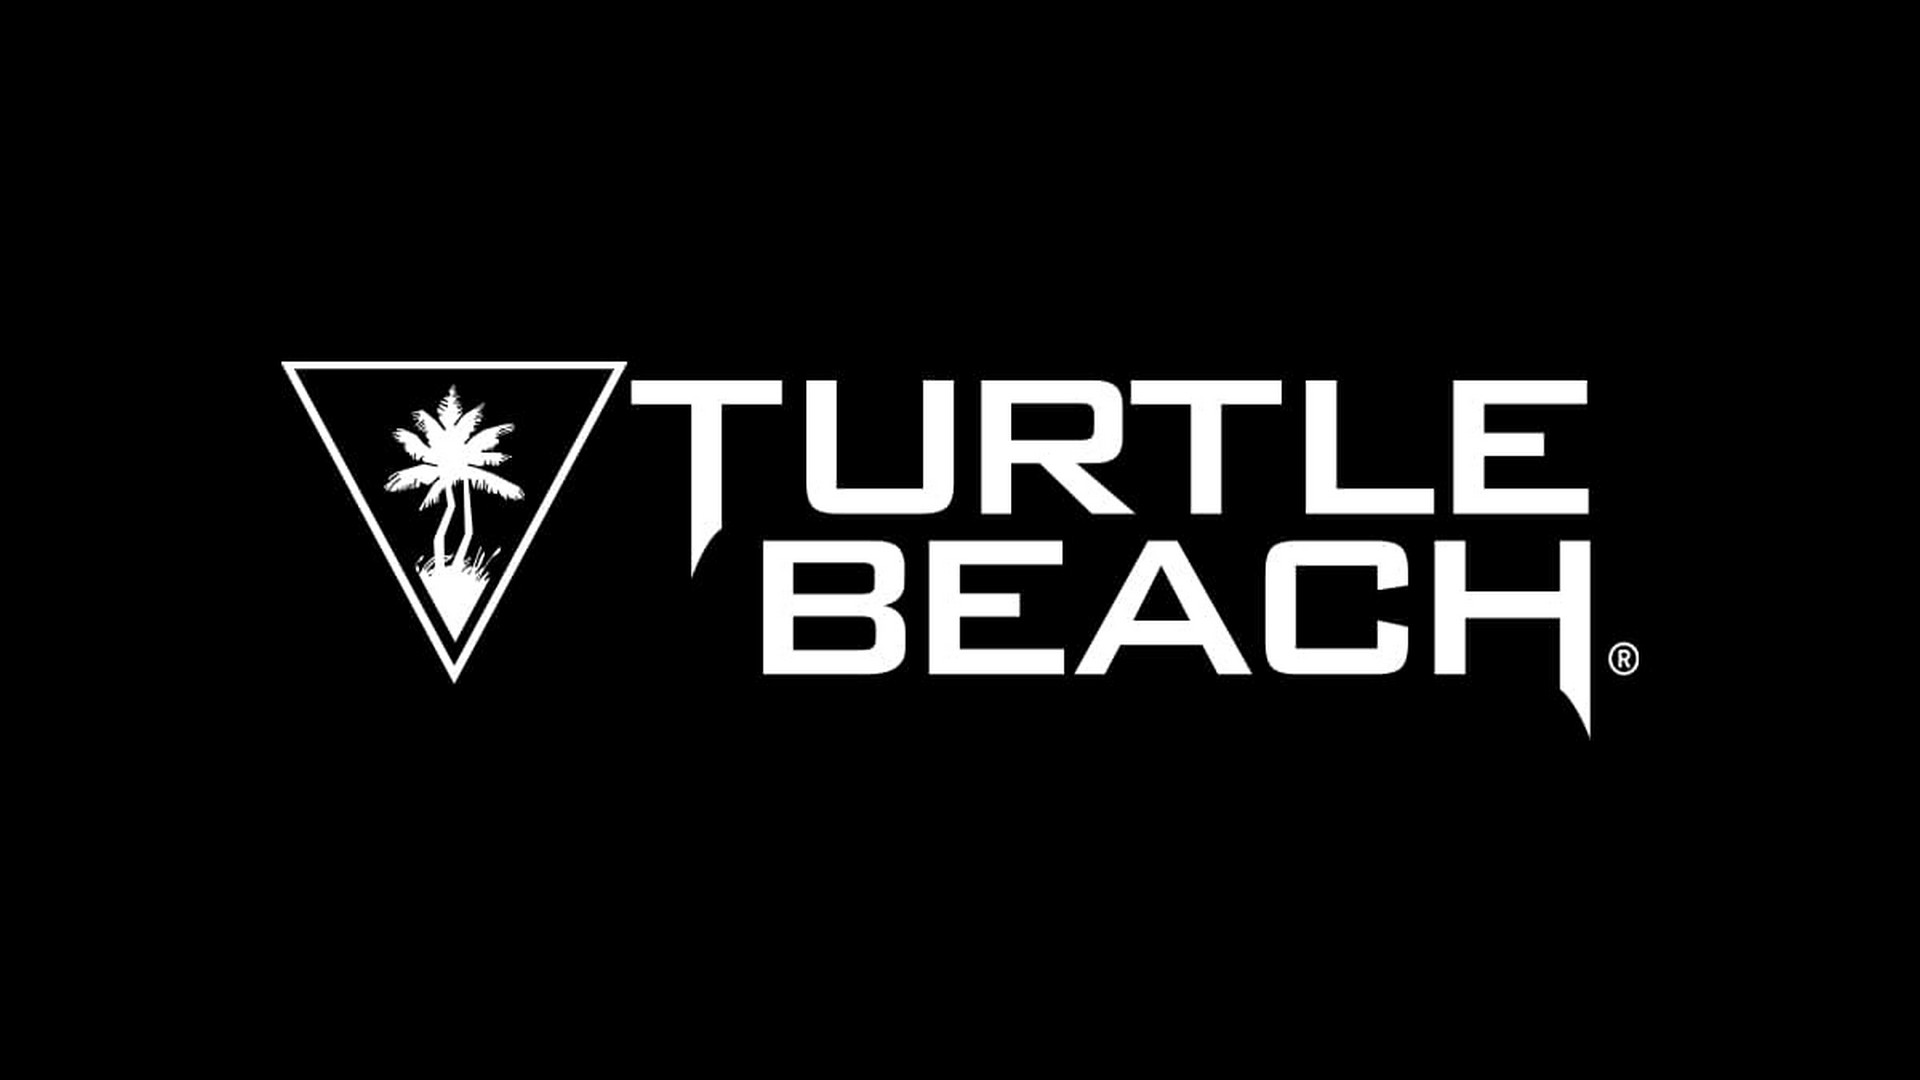 Turtle Beach Reveals The New Stealth 600 GEN 2 MAX & Stealth 600 GEN 2 USB Wireless Gaming Headsets